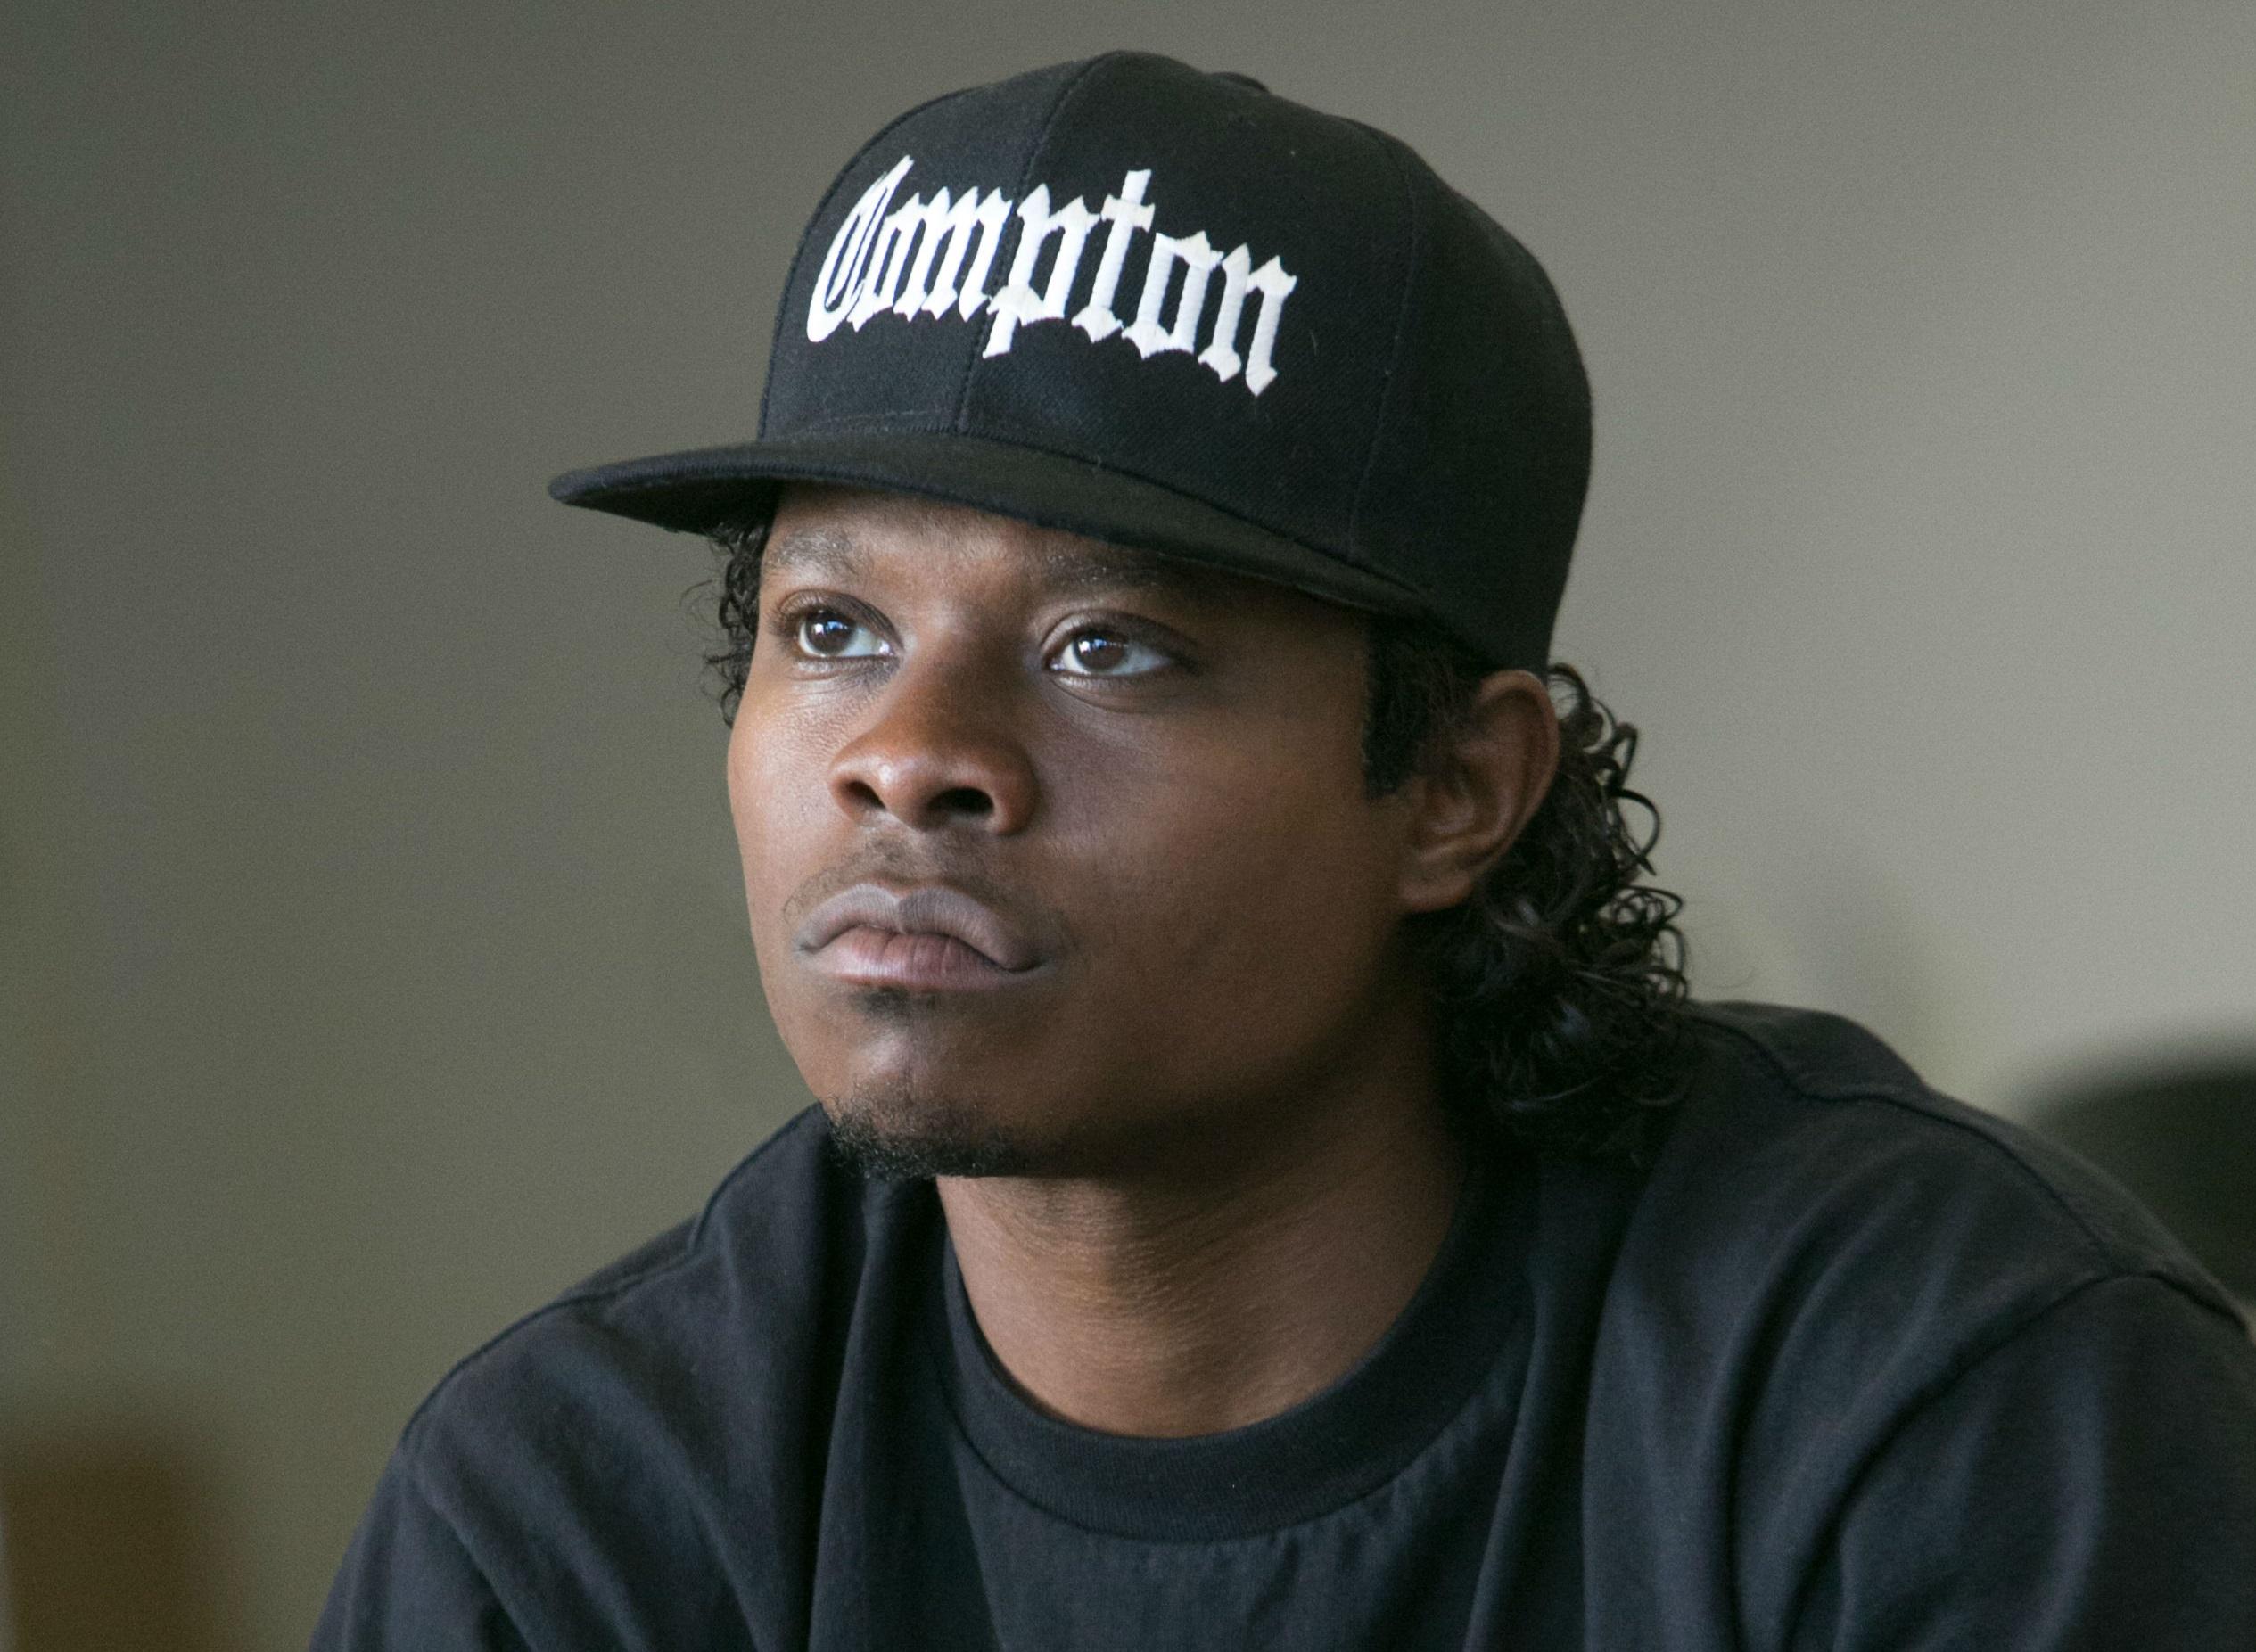 Eazy E Wallpaper Image Photo Picture Background